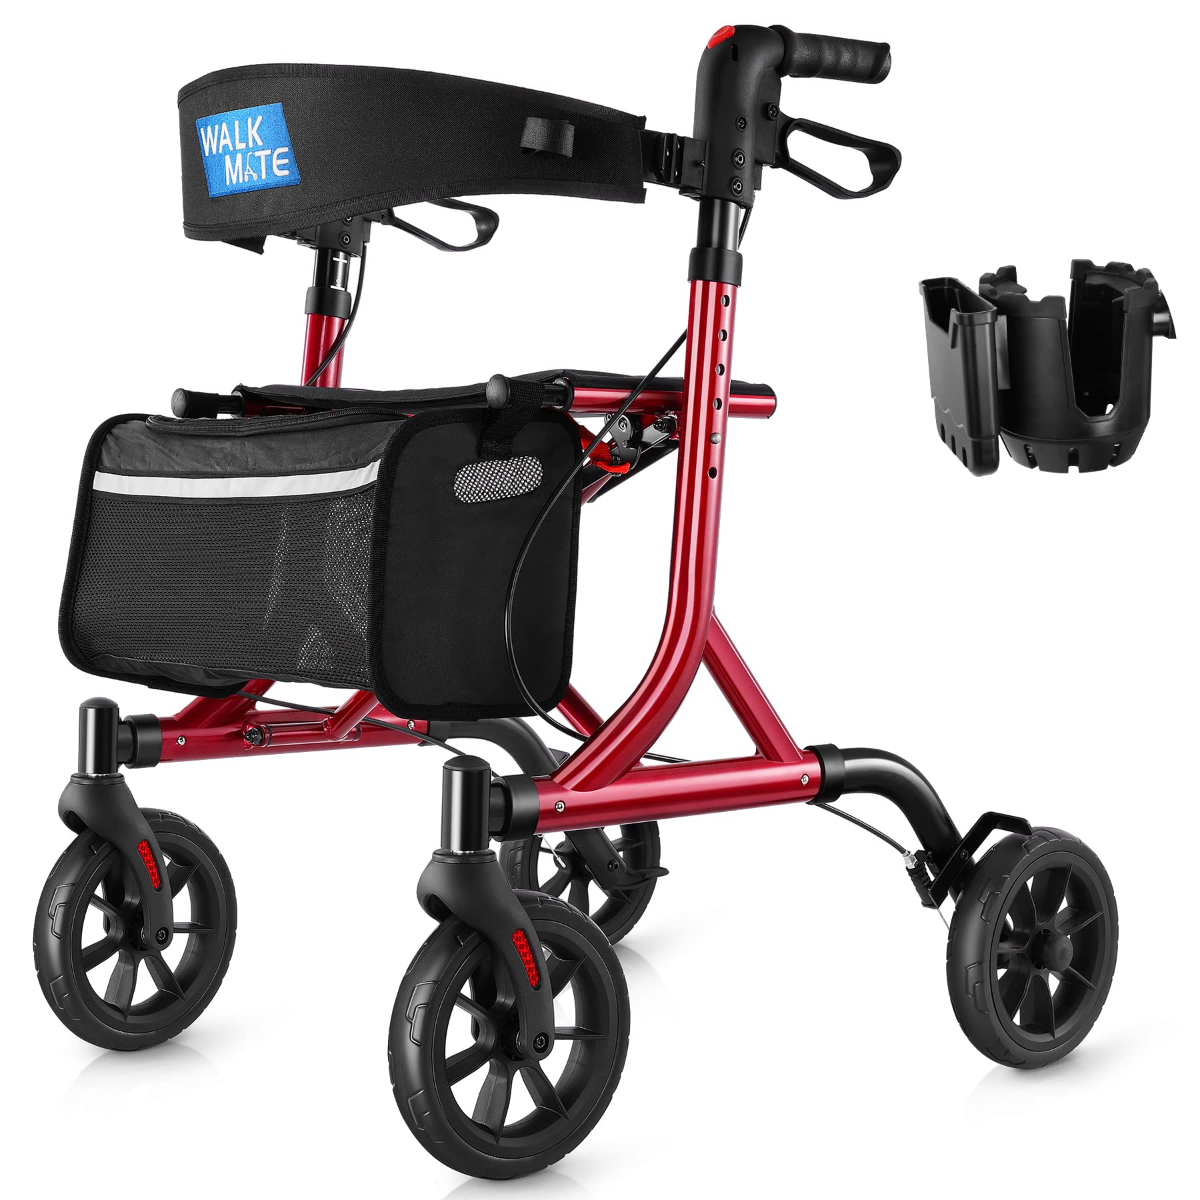 WALK MATE Rollator Walkers With Seat Back Support For Seniors Adults